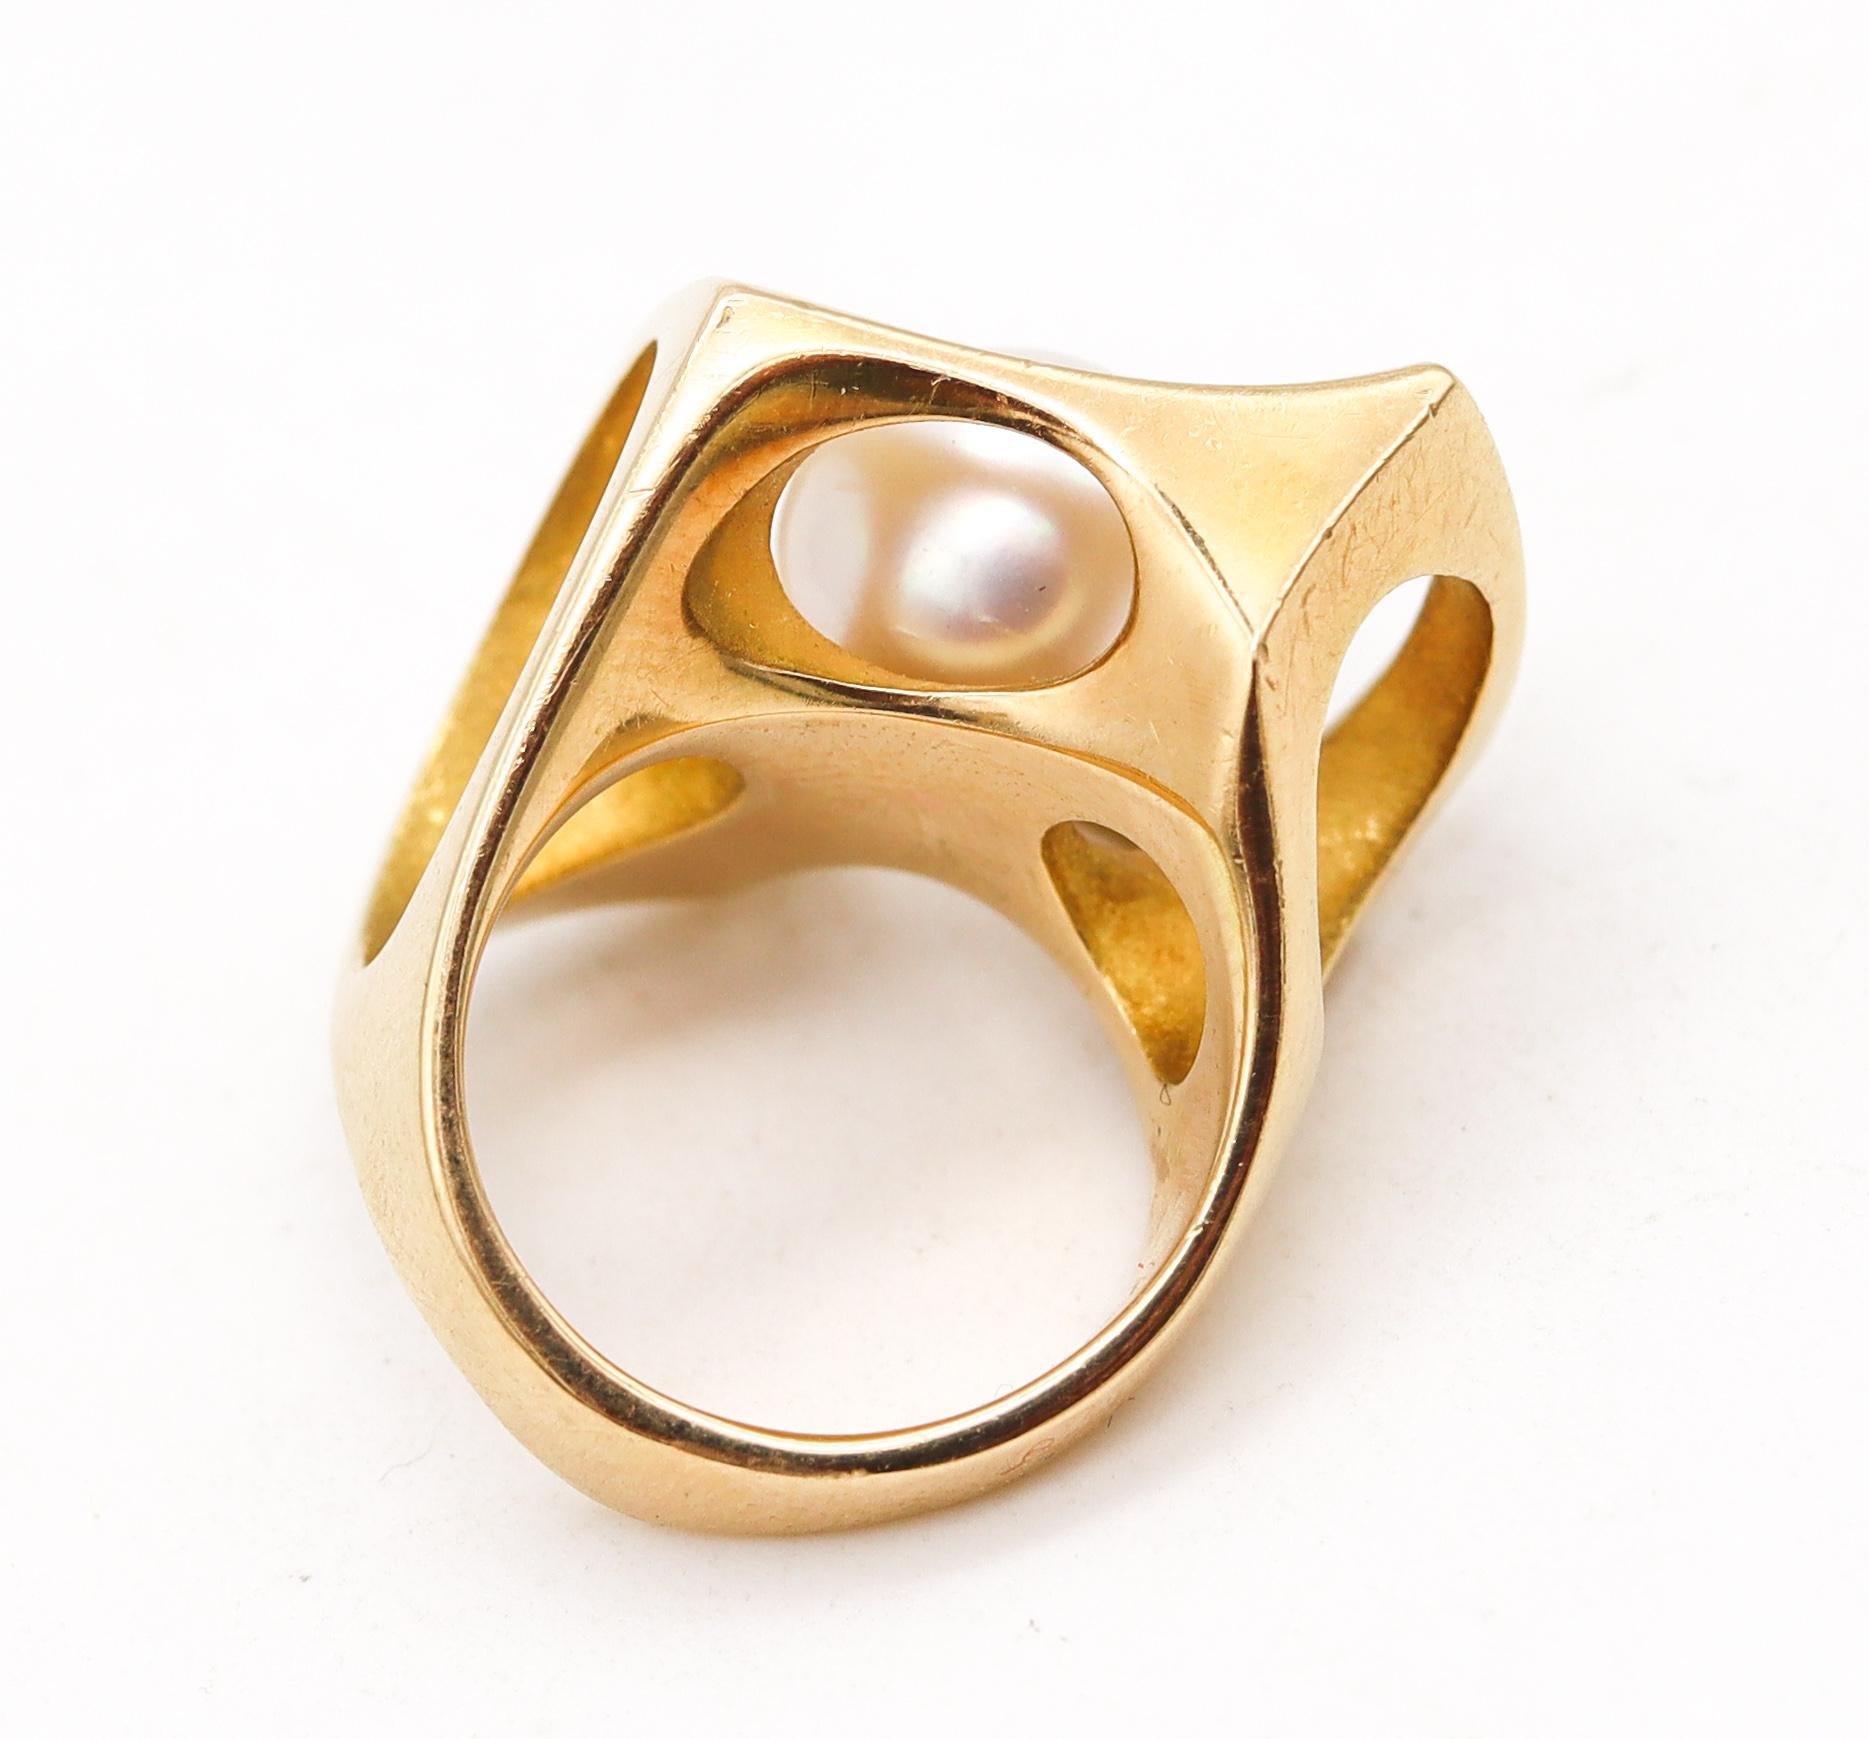 Aesthetic Movement Designer Sculptural Biomorphic Abstract Cocktail Ring 18Kt Gold with Akoya Pearl